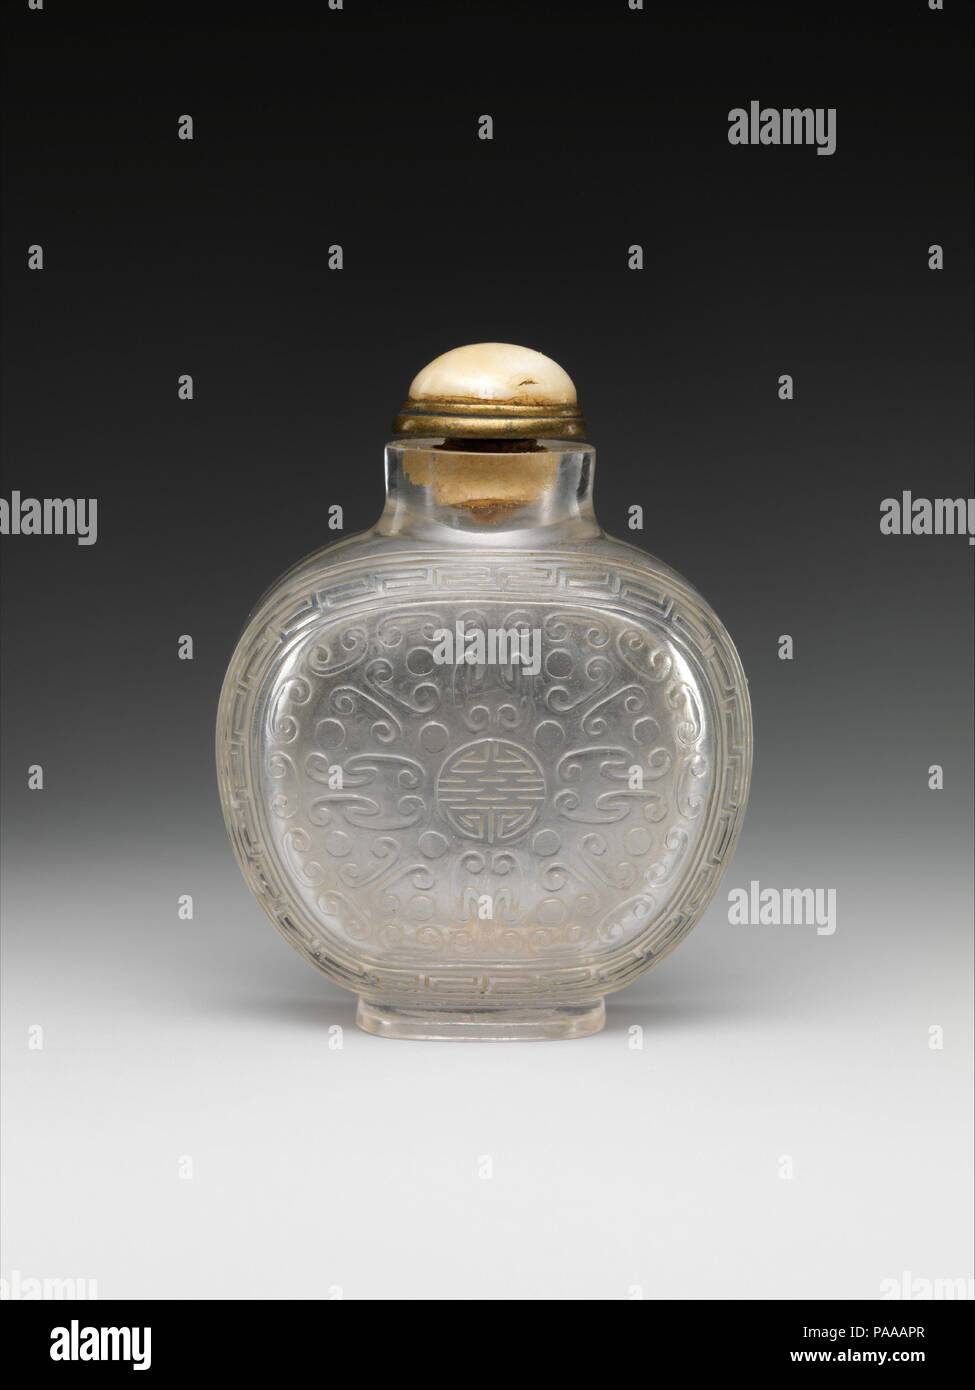 https://c8.alamy.com/comp/PAAAPR/snuff-bottle-with-the-character-of-longevity-shou-culture-china-dimensions-h-2-1316-in-71-cm-date-19th-century-museum-metropolitan-museum-of-art-new-york-usa-PAAAPR.jpg